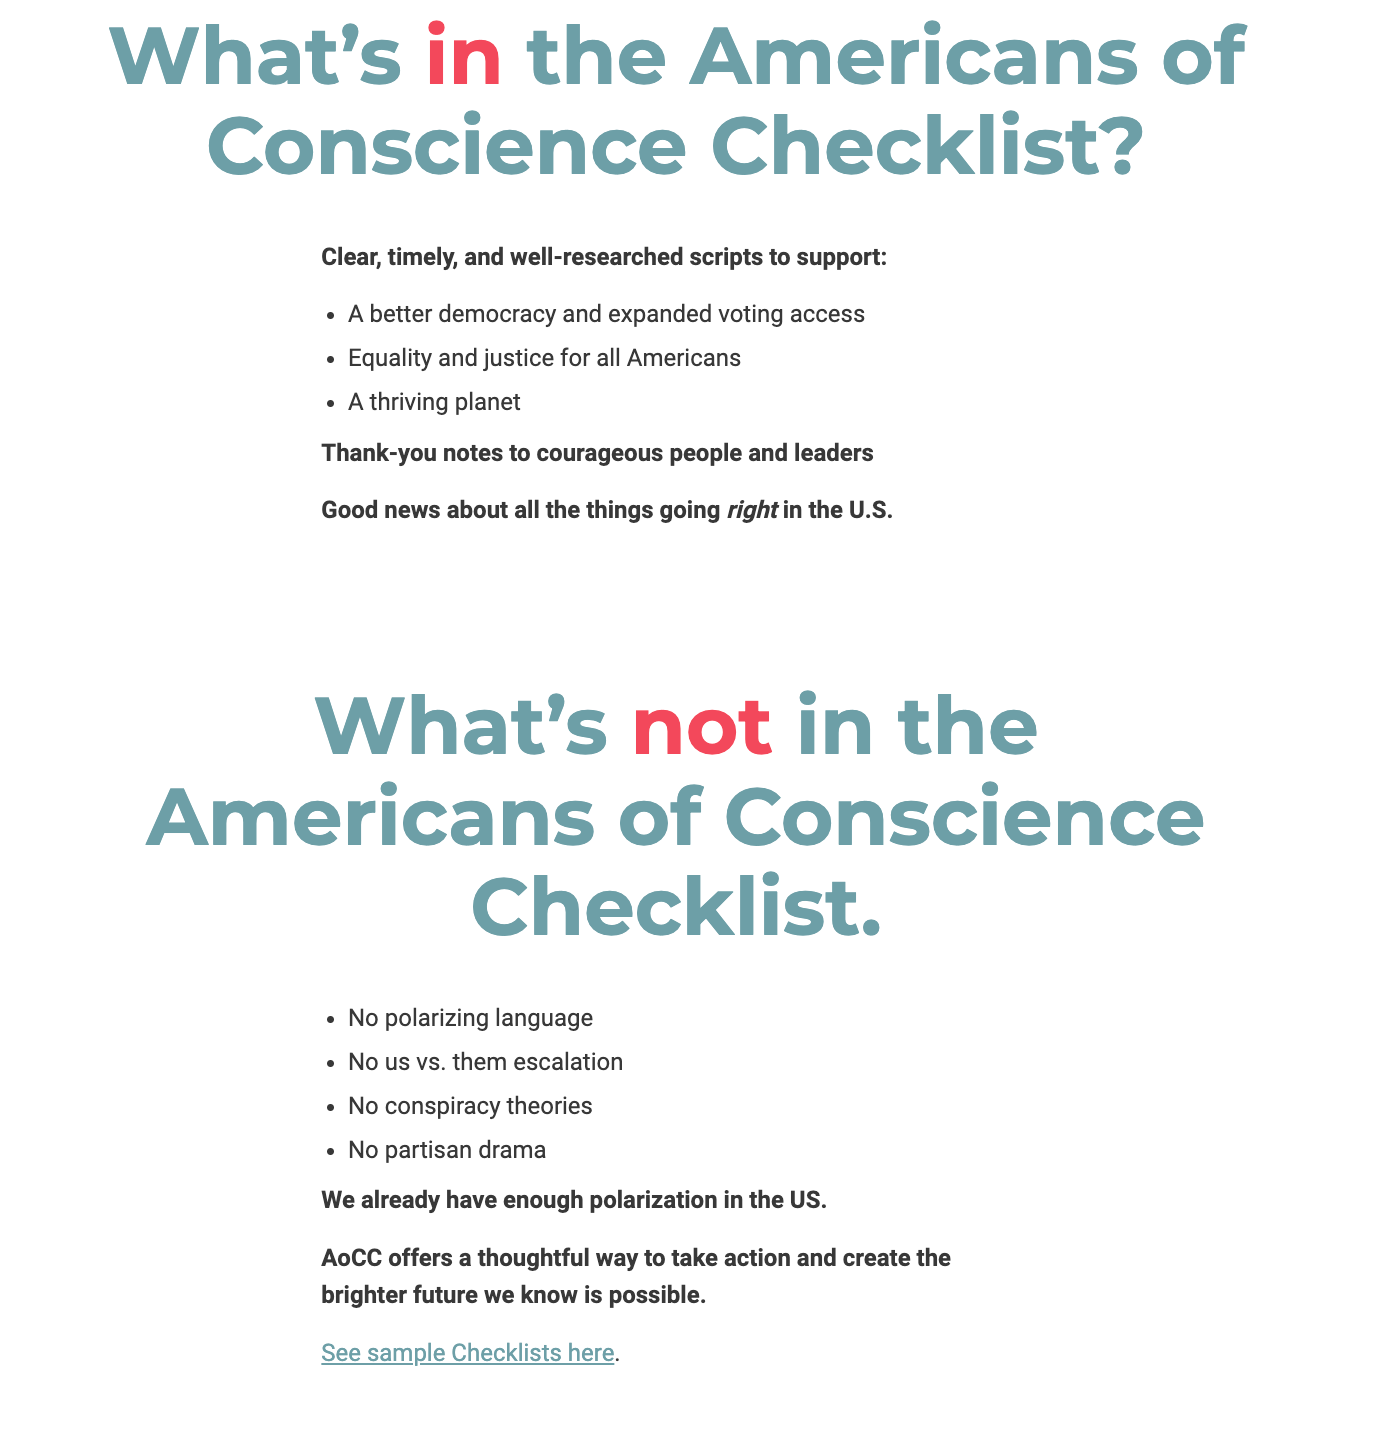 What’s in the Americans of Conscience Checklist?  Clear, timely, and well-researched scripts to support:  A better democracy and expanded voting access  Equality and justice for all Americans  A thriving planet  Thank-you notes to courageous people and leaders  Good news about all the things going right in the U.S.  What’s not in the Americans of Conscience Checklist.  No polarizing language  No us vs. them escalation  No conspiracy theories  No partisan drama  We already have enough polarization in the US.   AoCC offers a thoughtful way to take action and create the brighter future we know is possible.